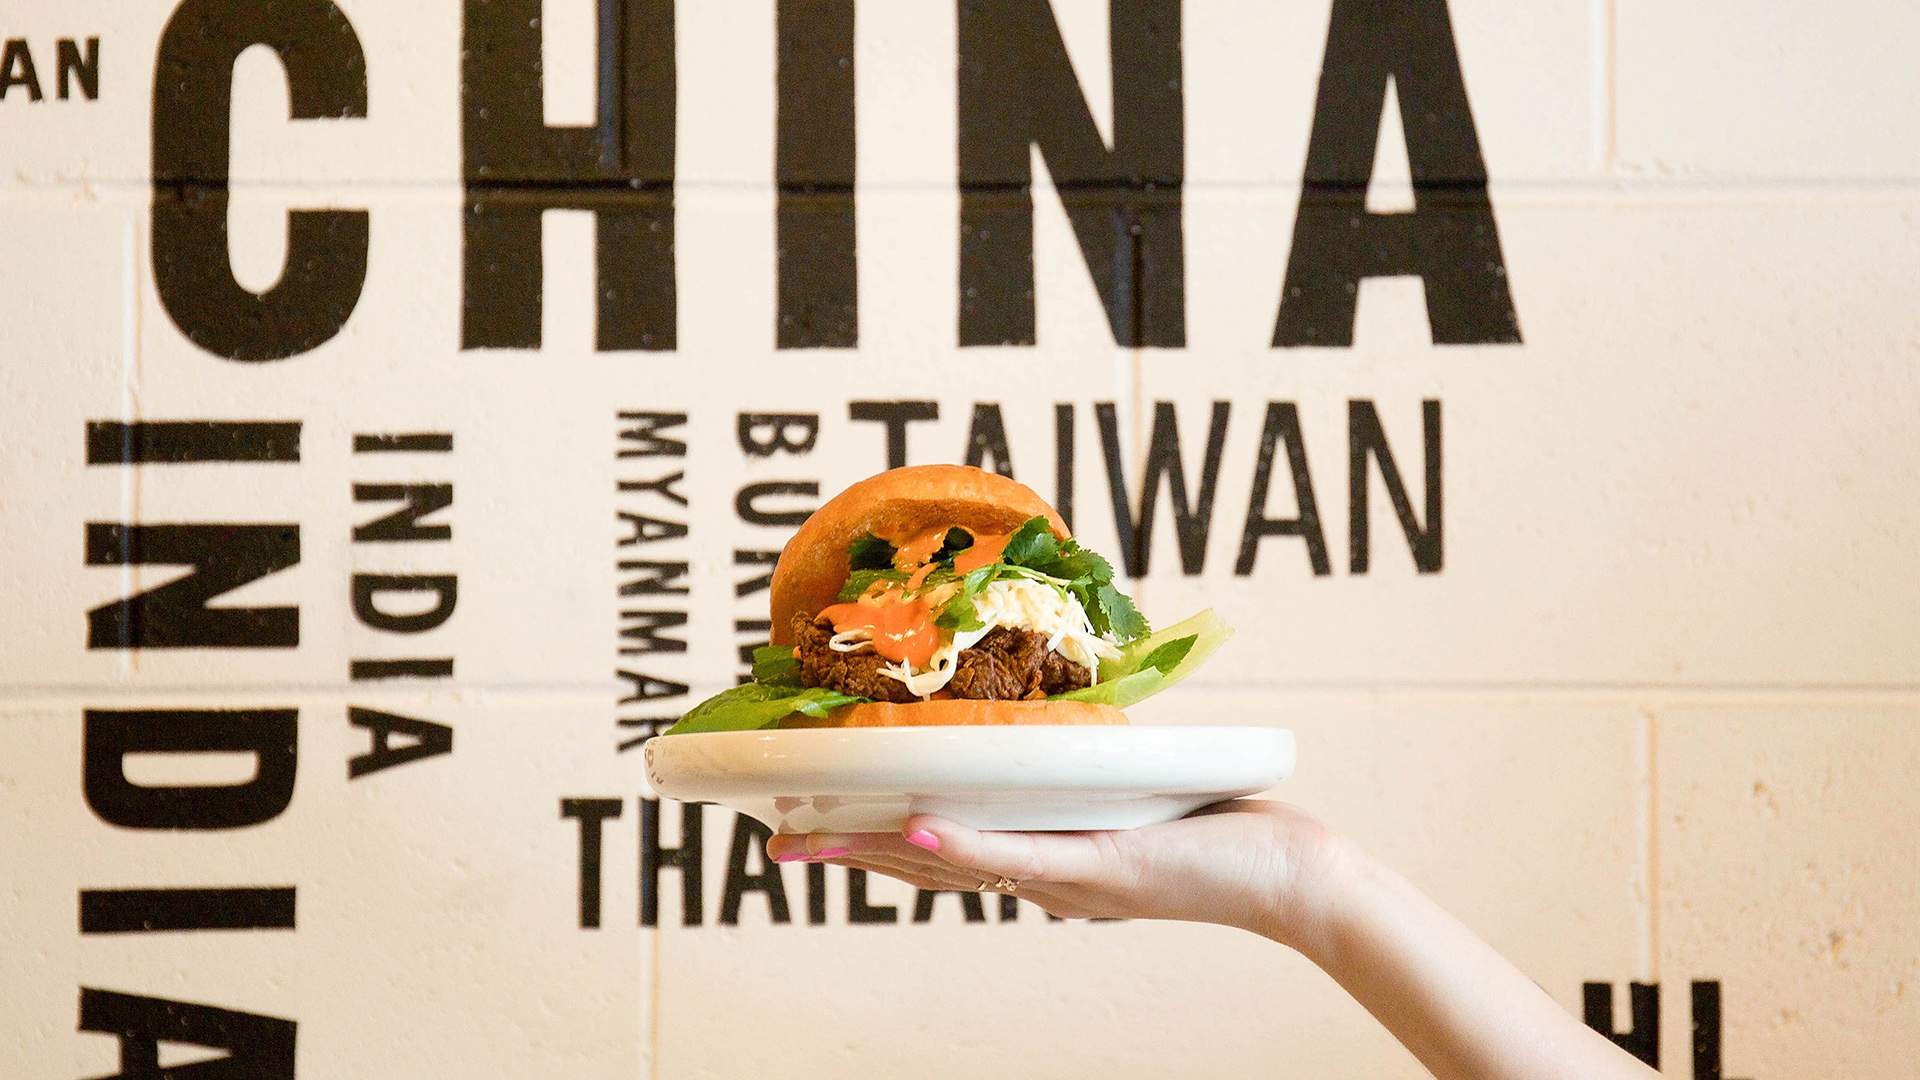 Concept Burger Is Wolli Creek's New International-Themed Burger Joint